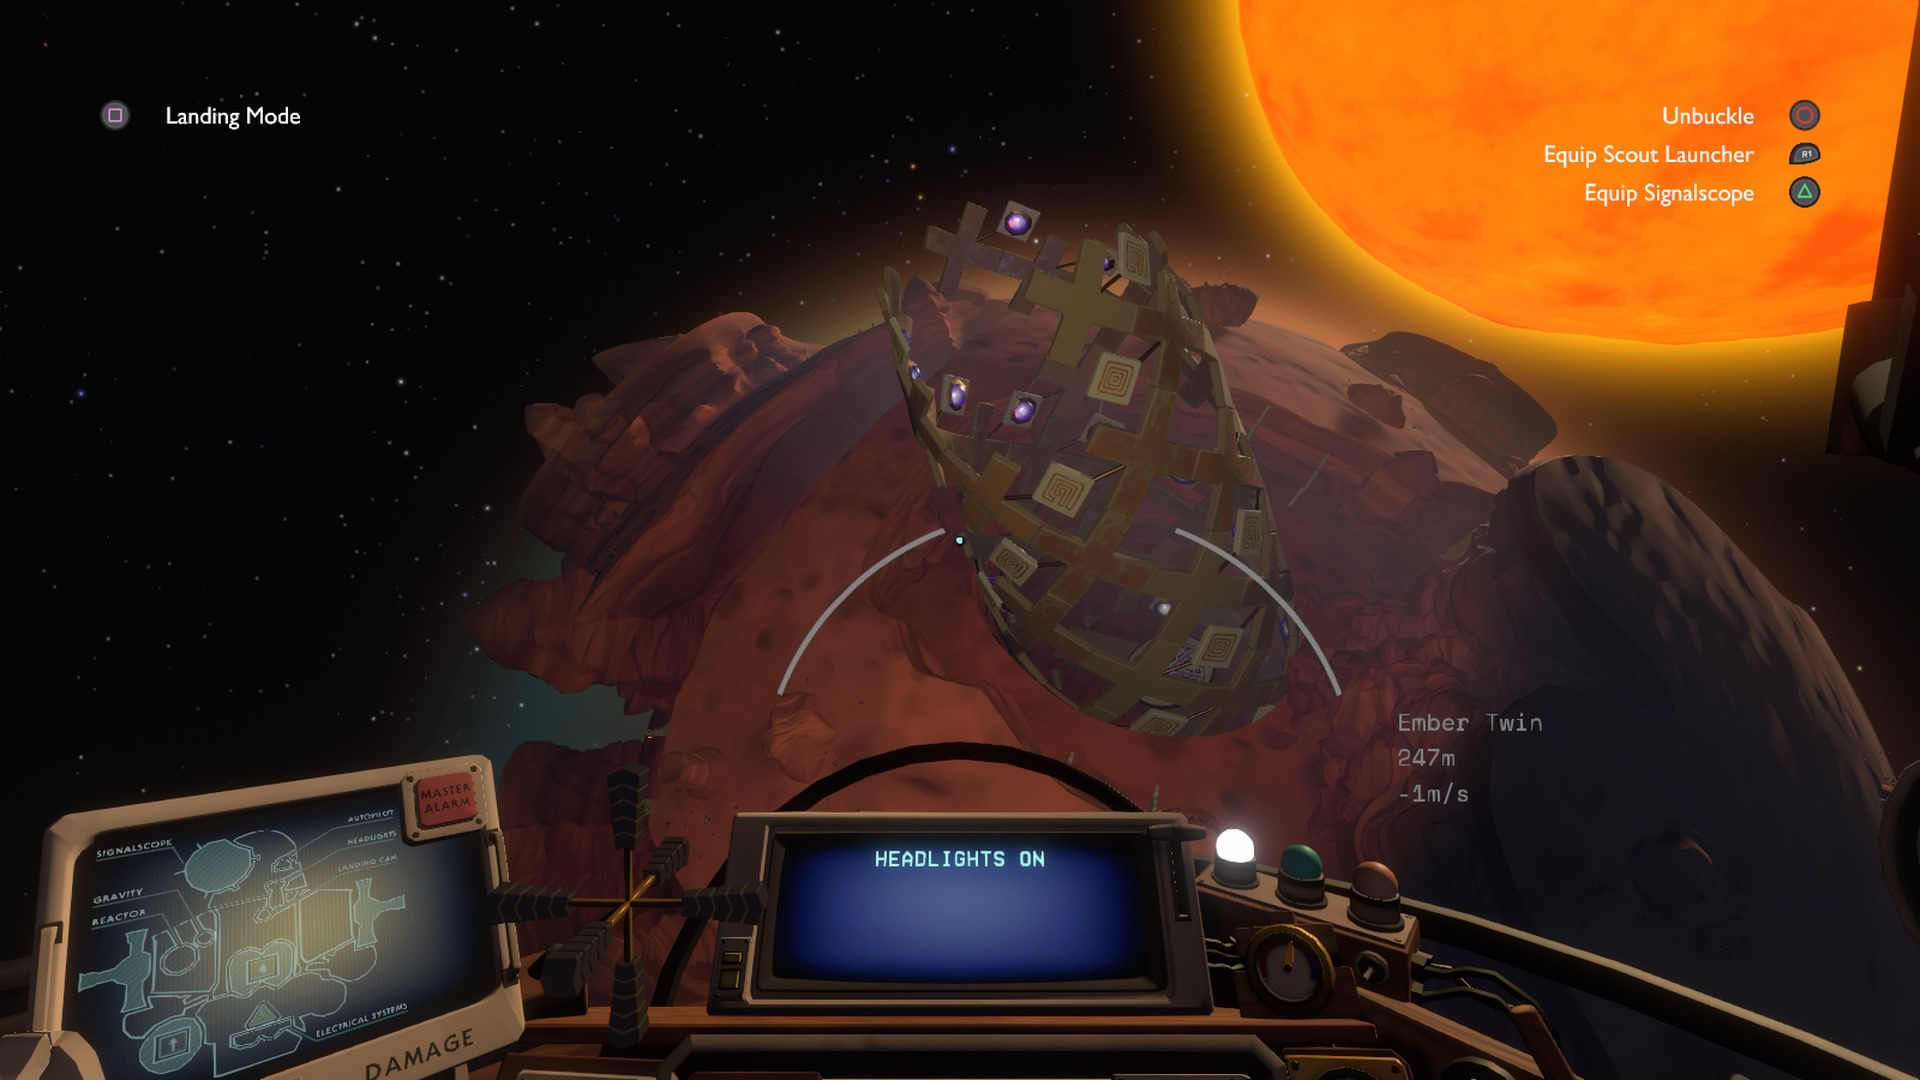 outer wilds trophy guide